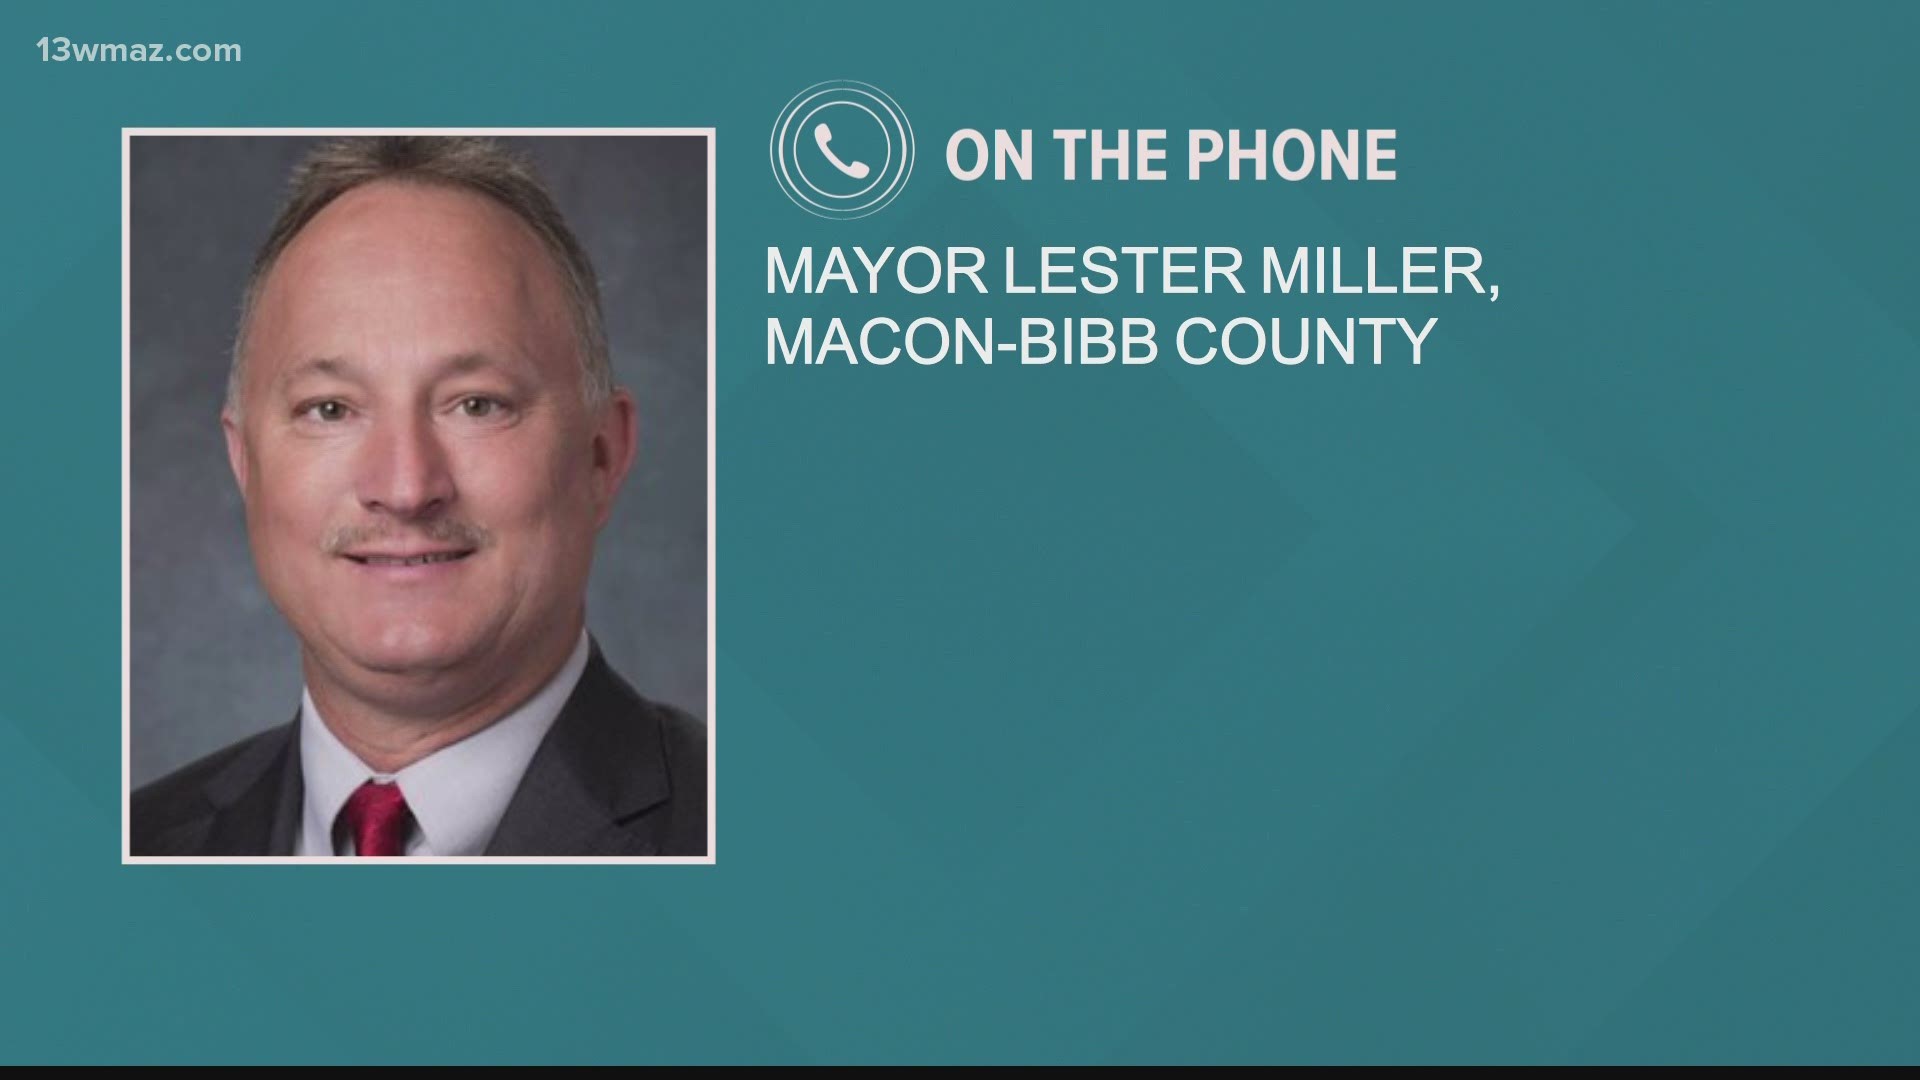 Macon Mayor Lester Miller has signed an executive order to help slow the spread of COVID-19 in the community.